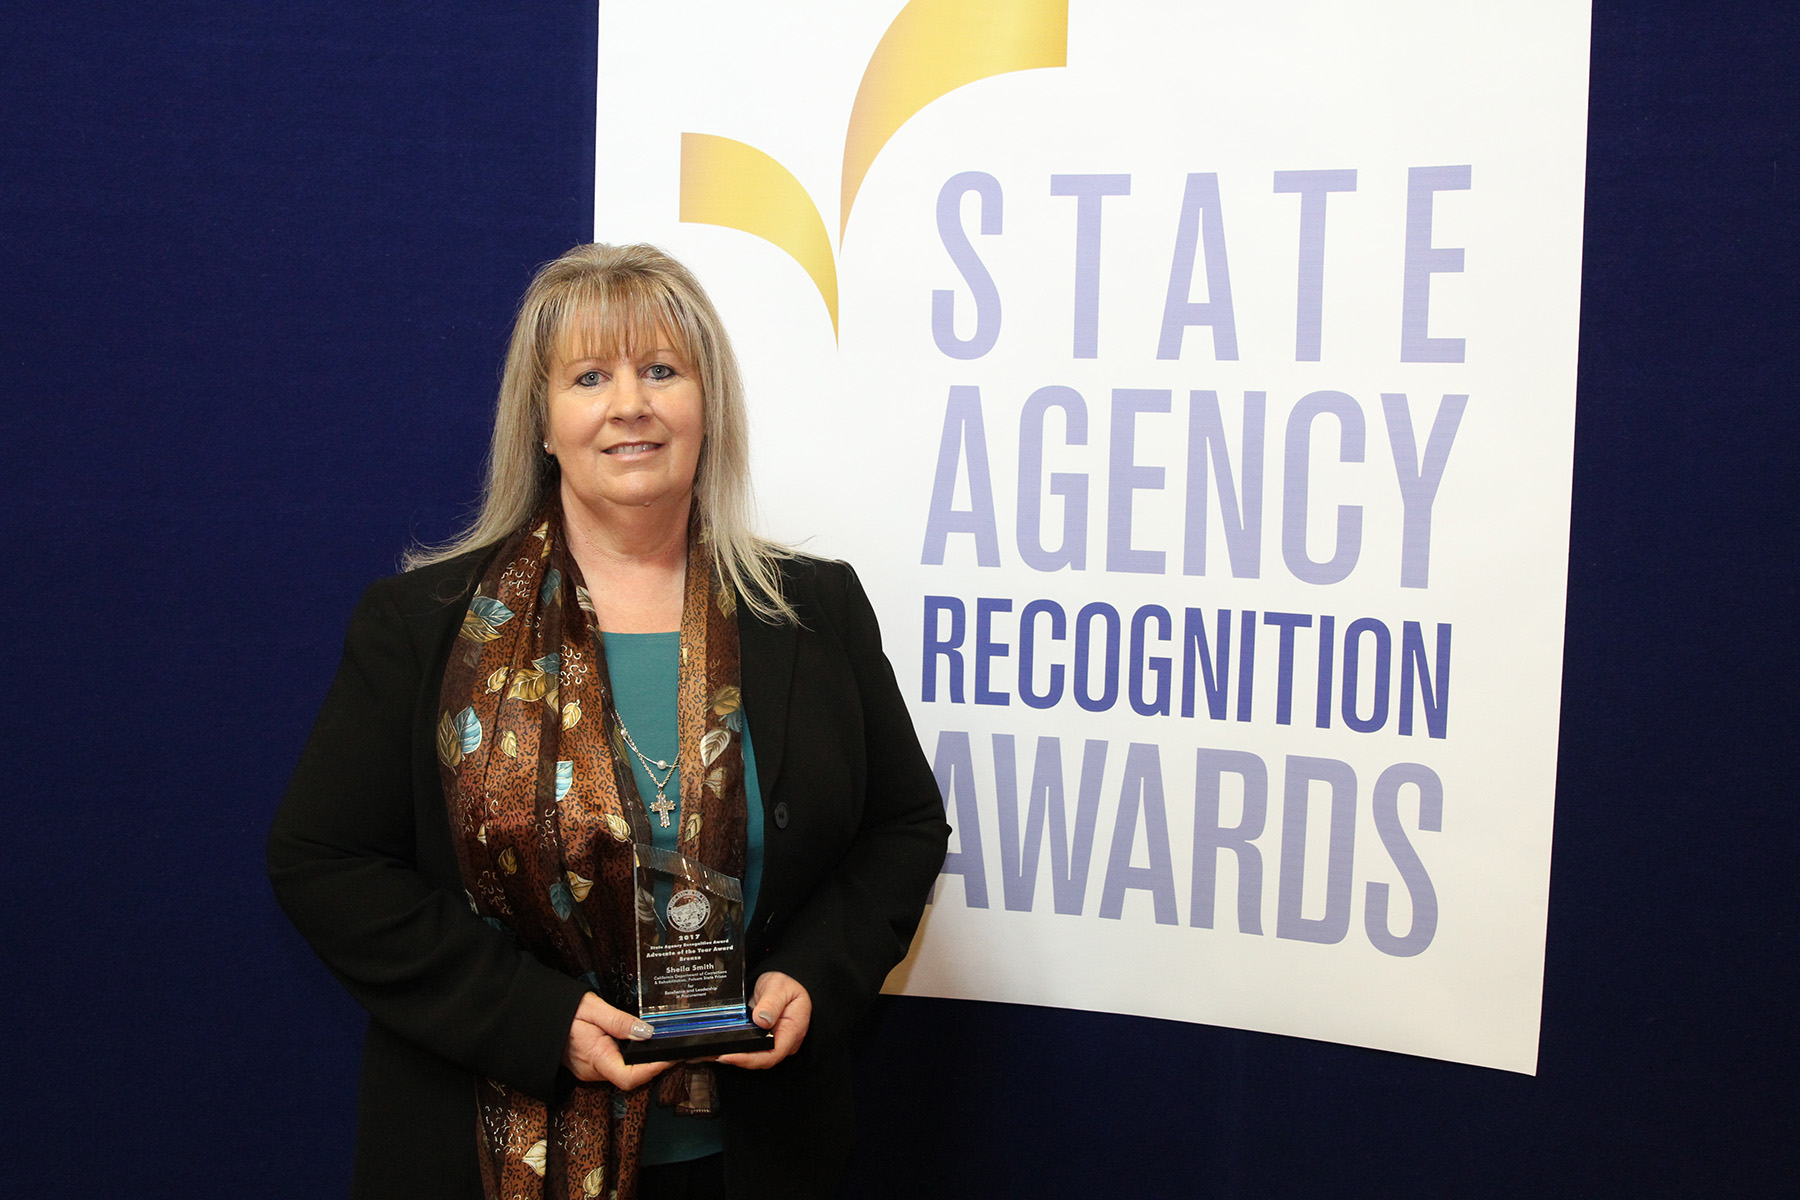 Sheila Smith, California department of corrections and rehabilitation, folsom state prison, accepts the bronze advocate of the year award